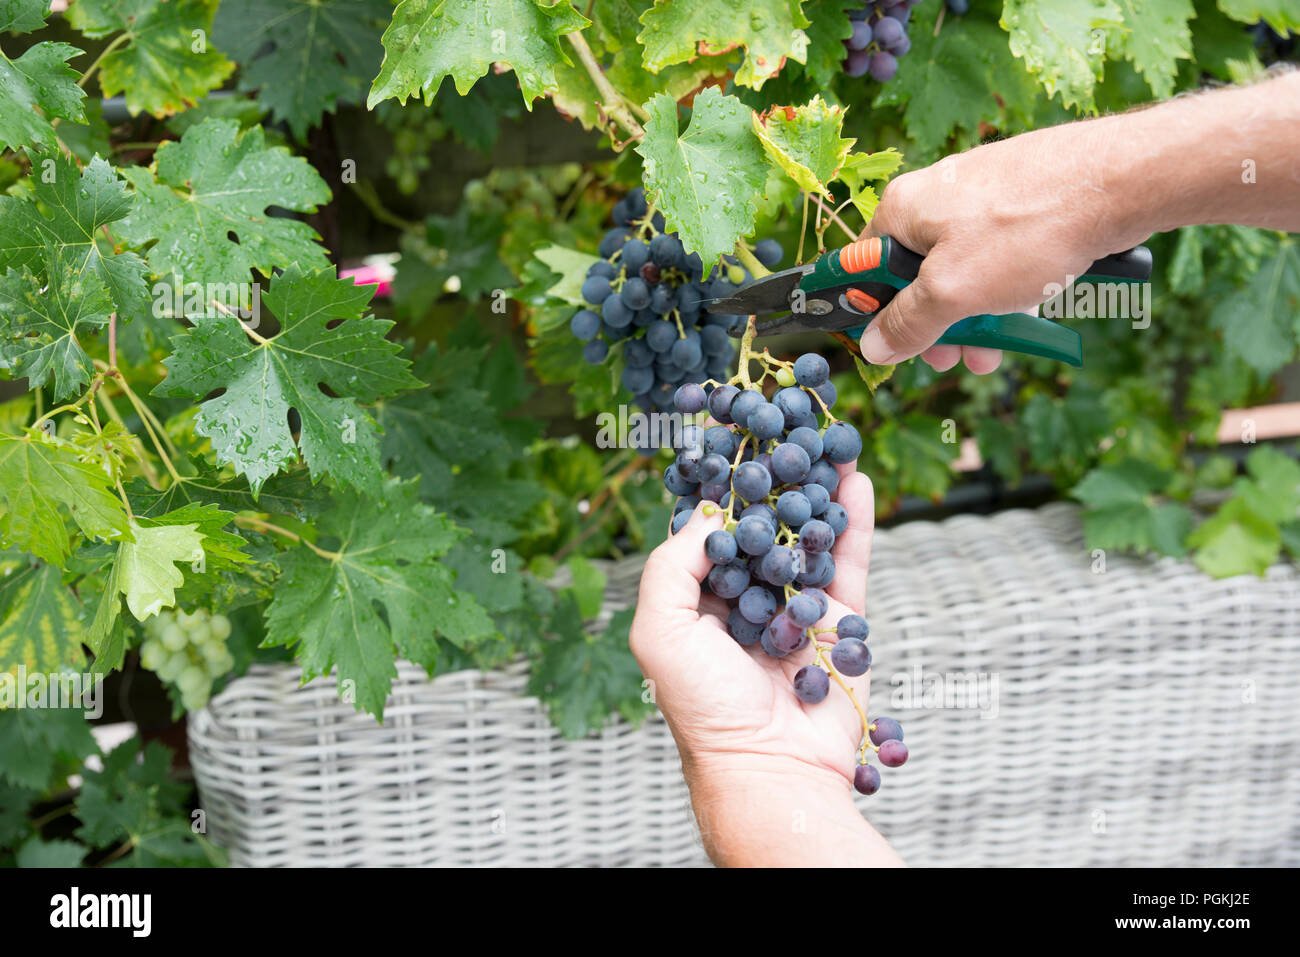 woman engaged in the harvesting and cutting of bunches of blue grapes for the purpose of making grape juice or red wine Stock Photo